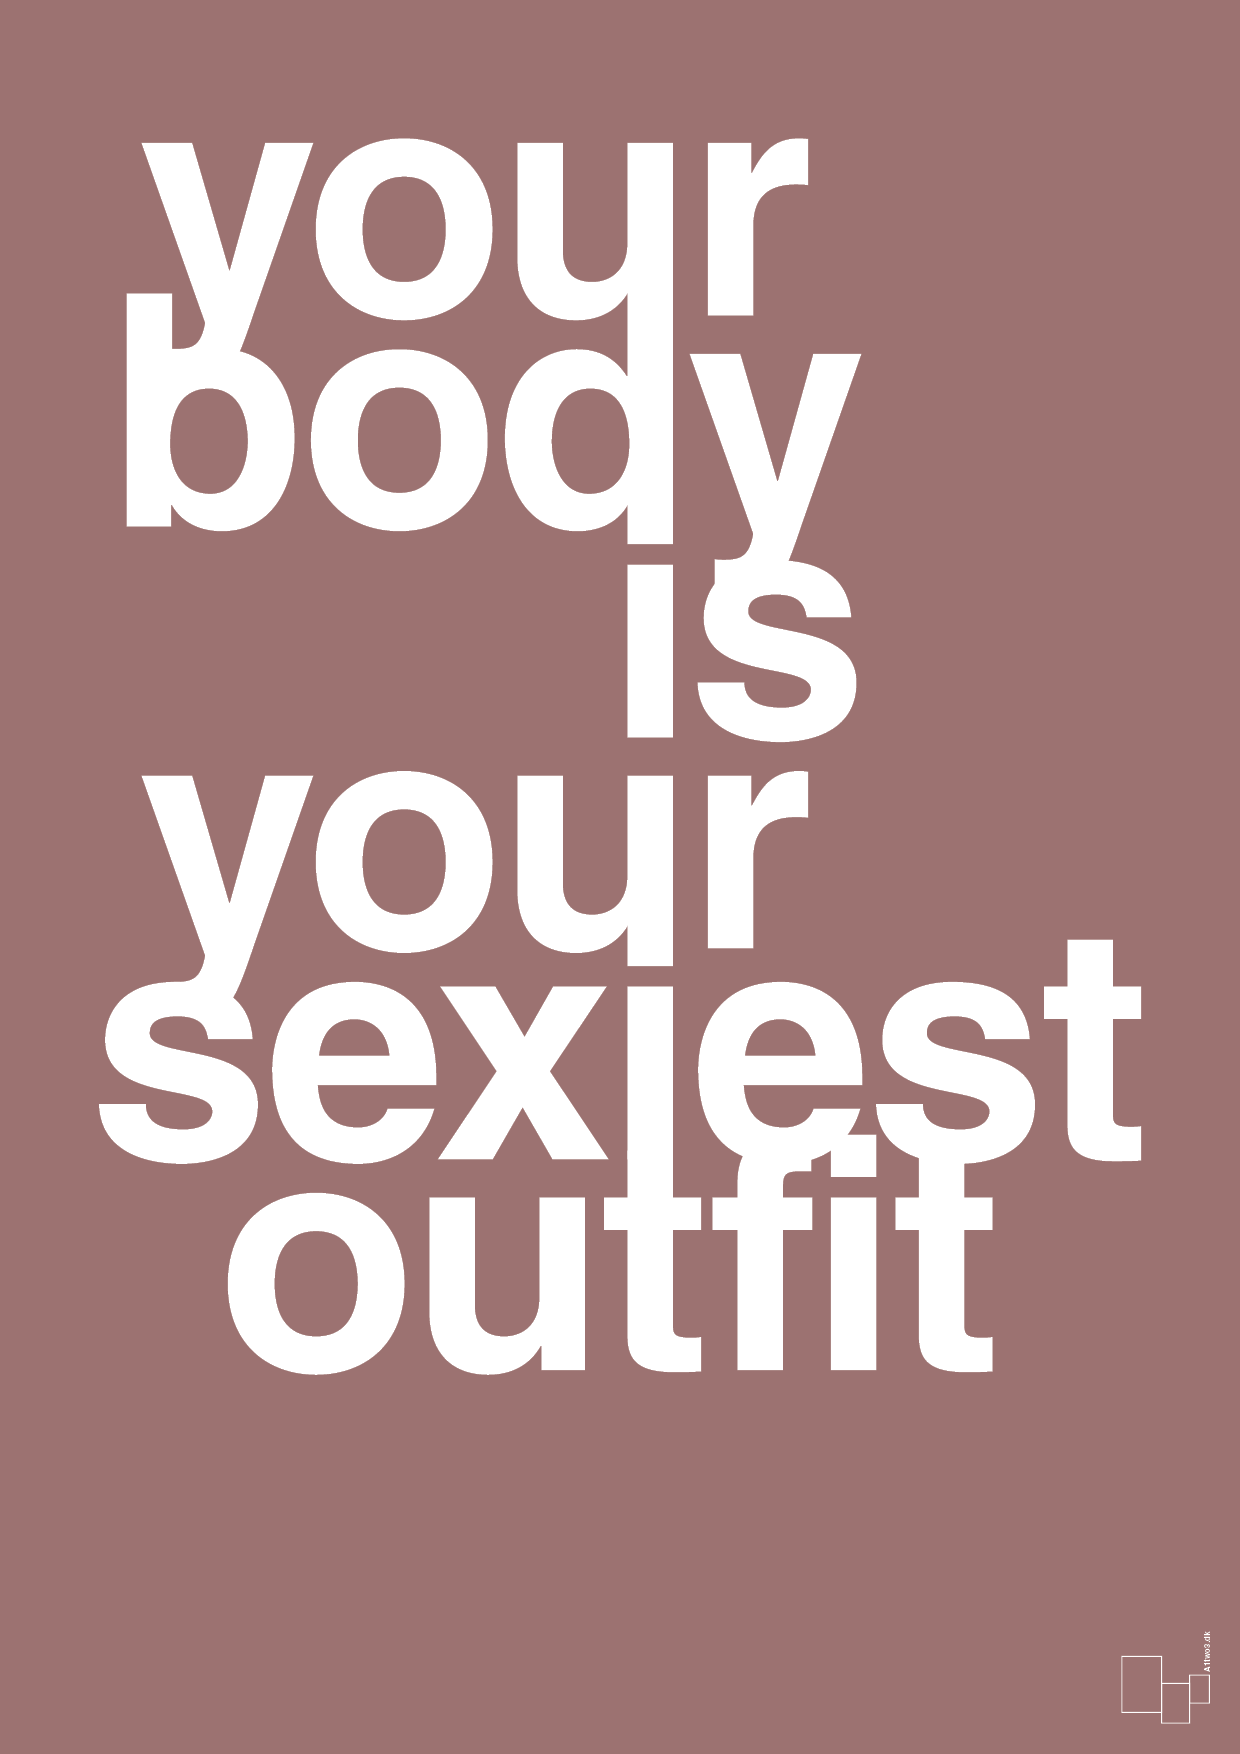 your body is your sexiest outfit - Plakat med Sport & Fritid i Plum